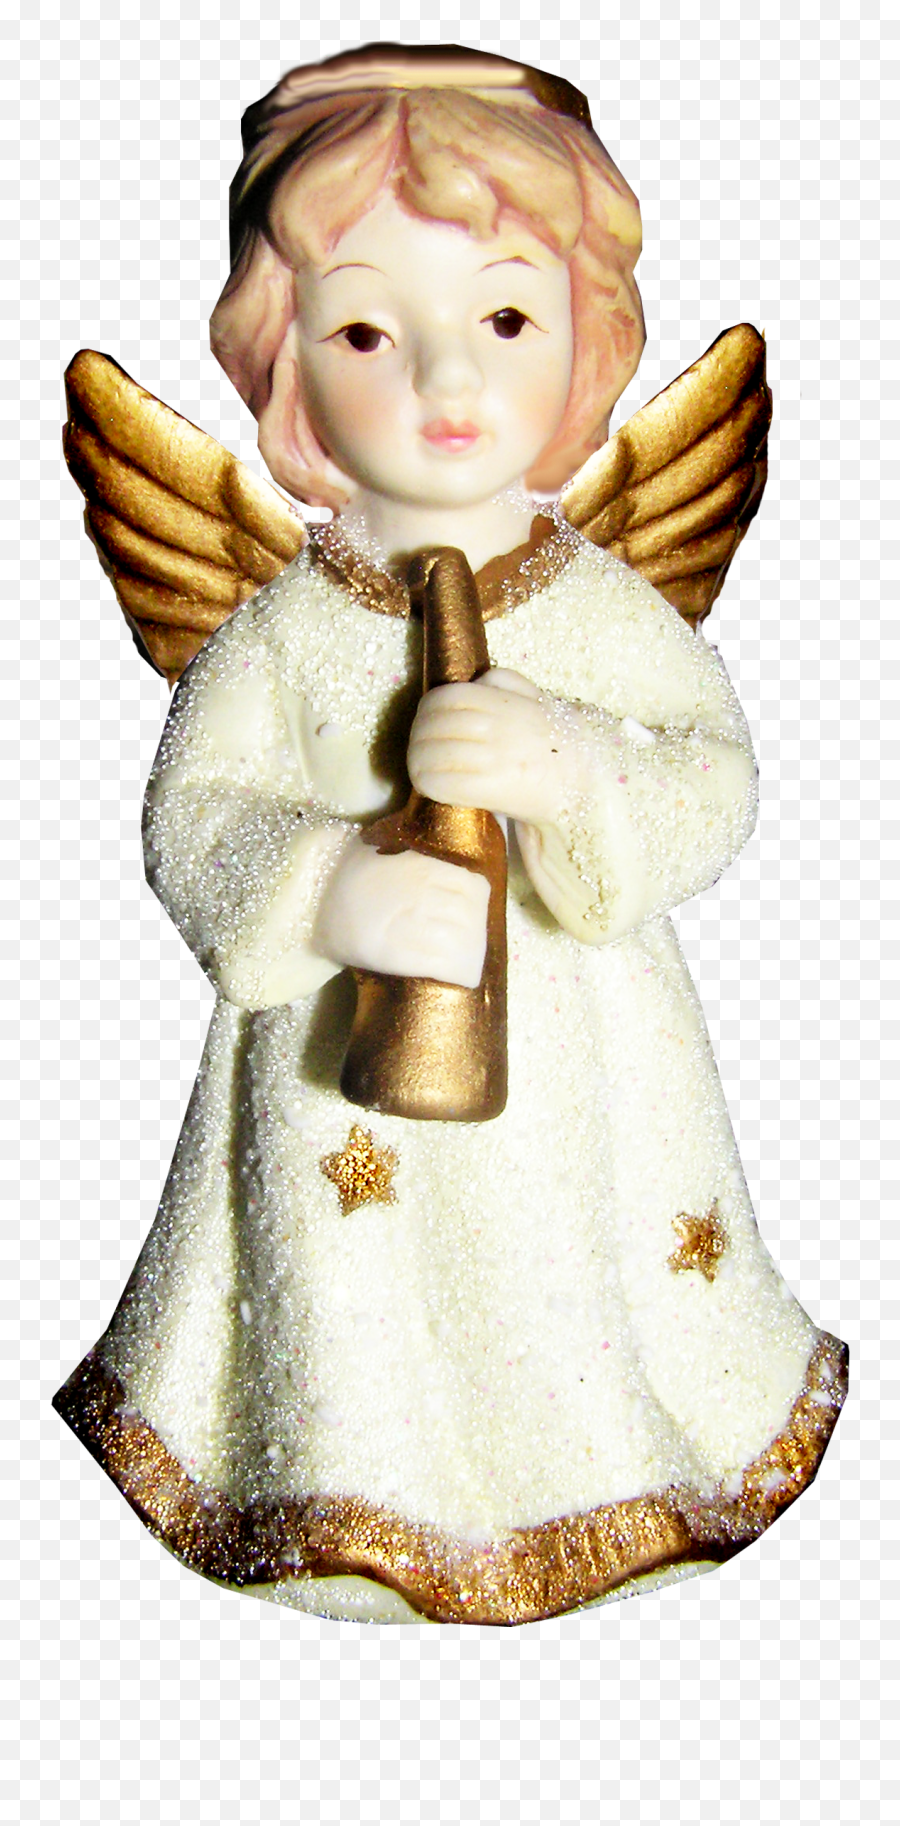 Download Little Angel Png Image For Free - Portable Network Graphics,Angel Png